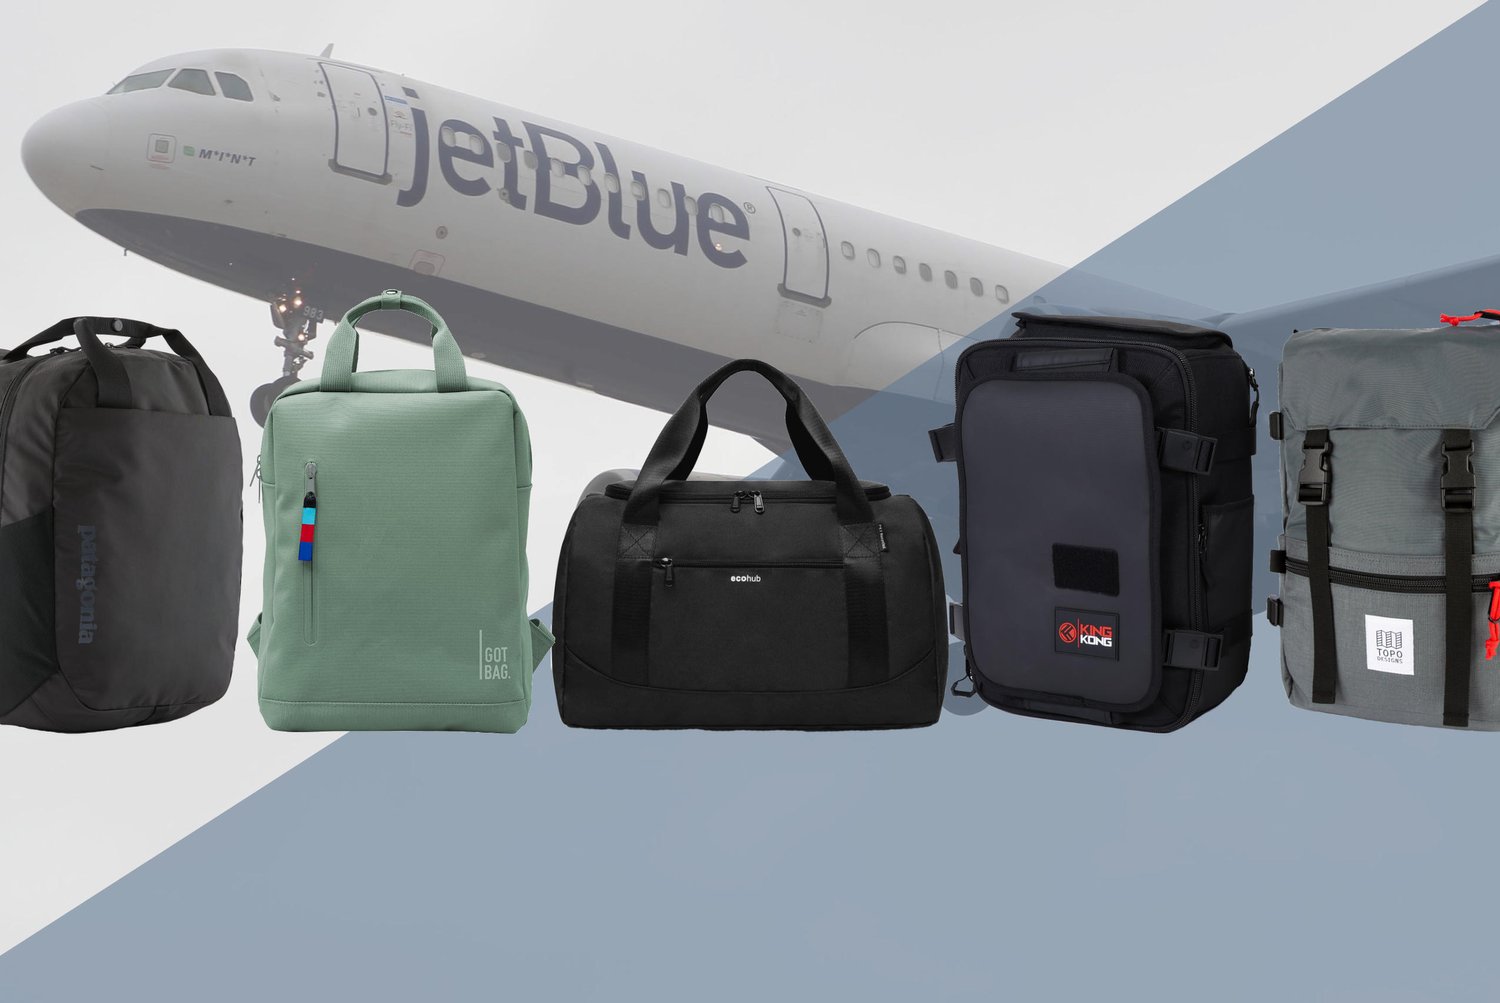  KT20 Under Seat 17x13x8 Max Sized Carry on Holdall Luggage  Personal Item Flight Bags for Jet Blue Airlines